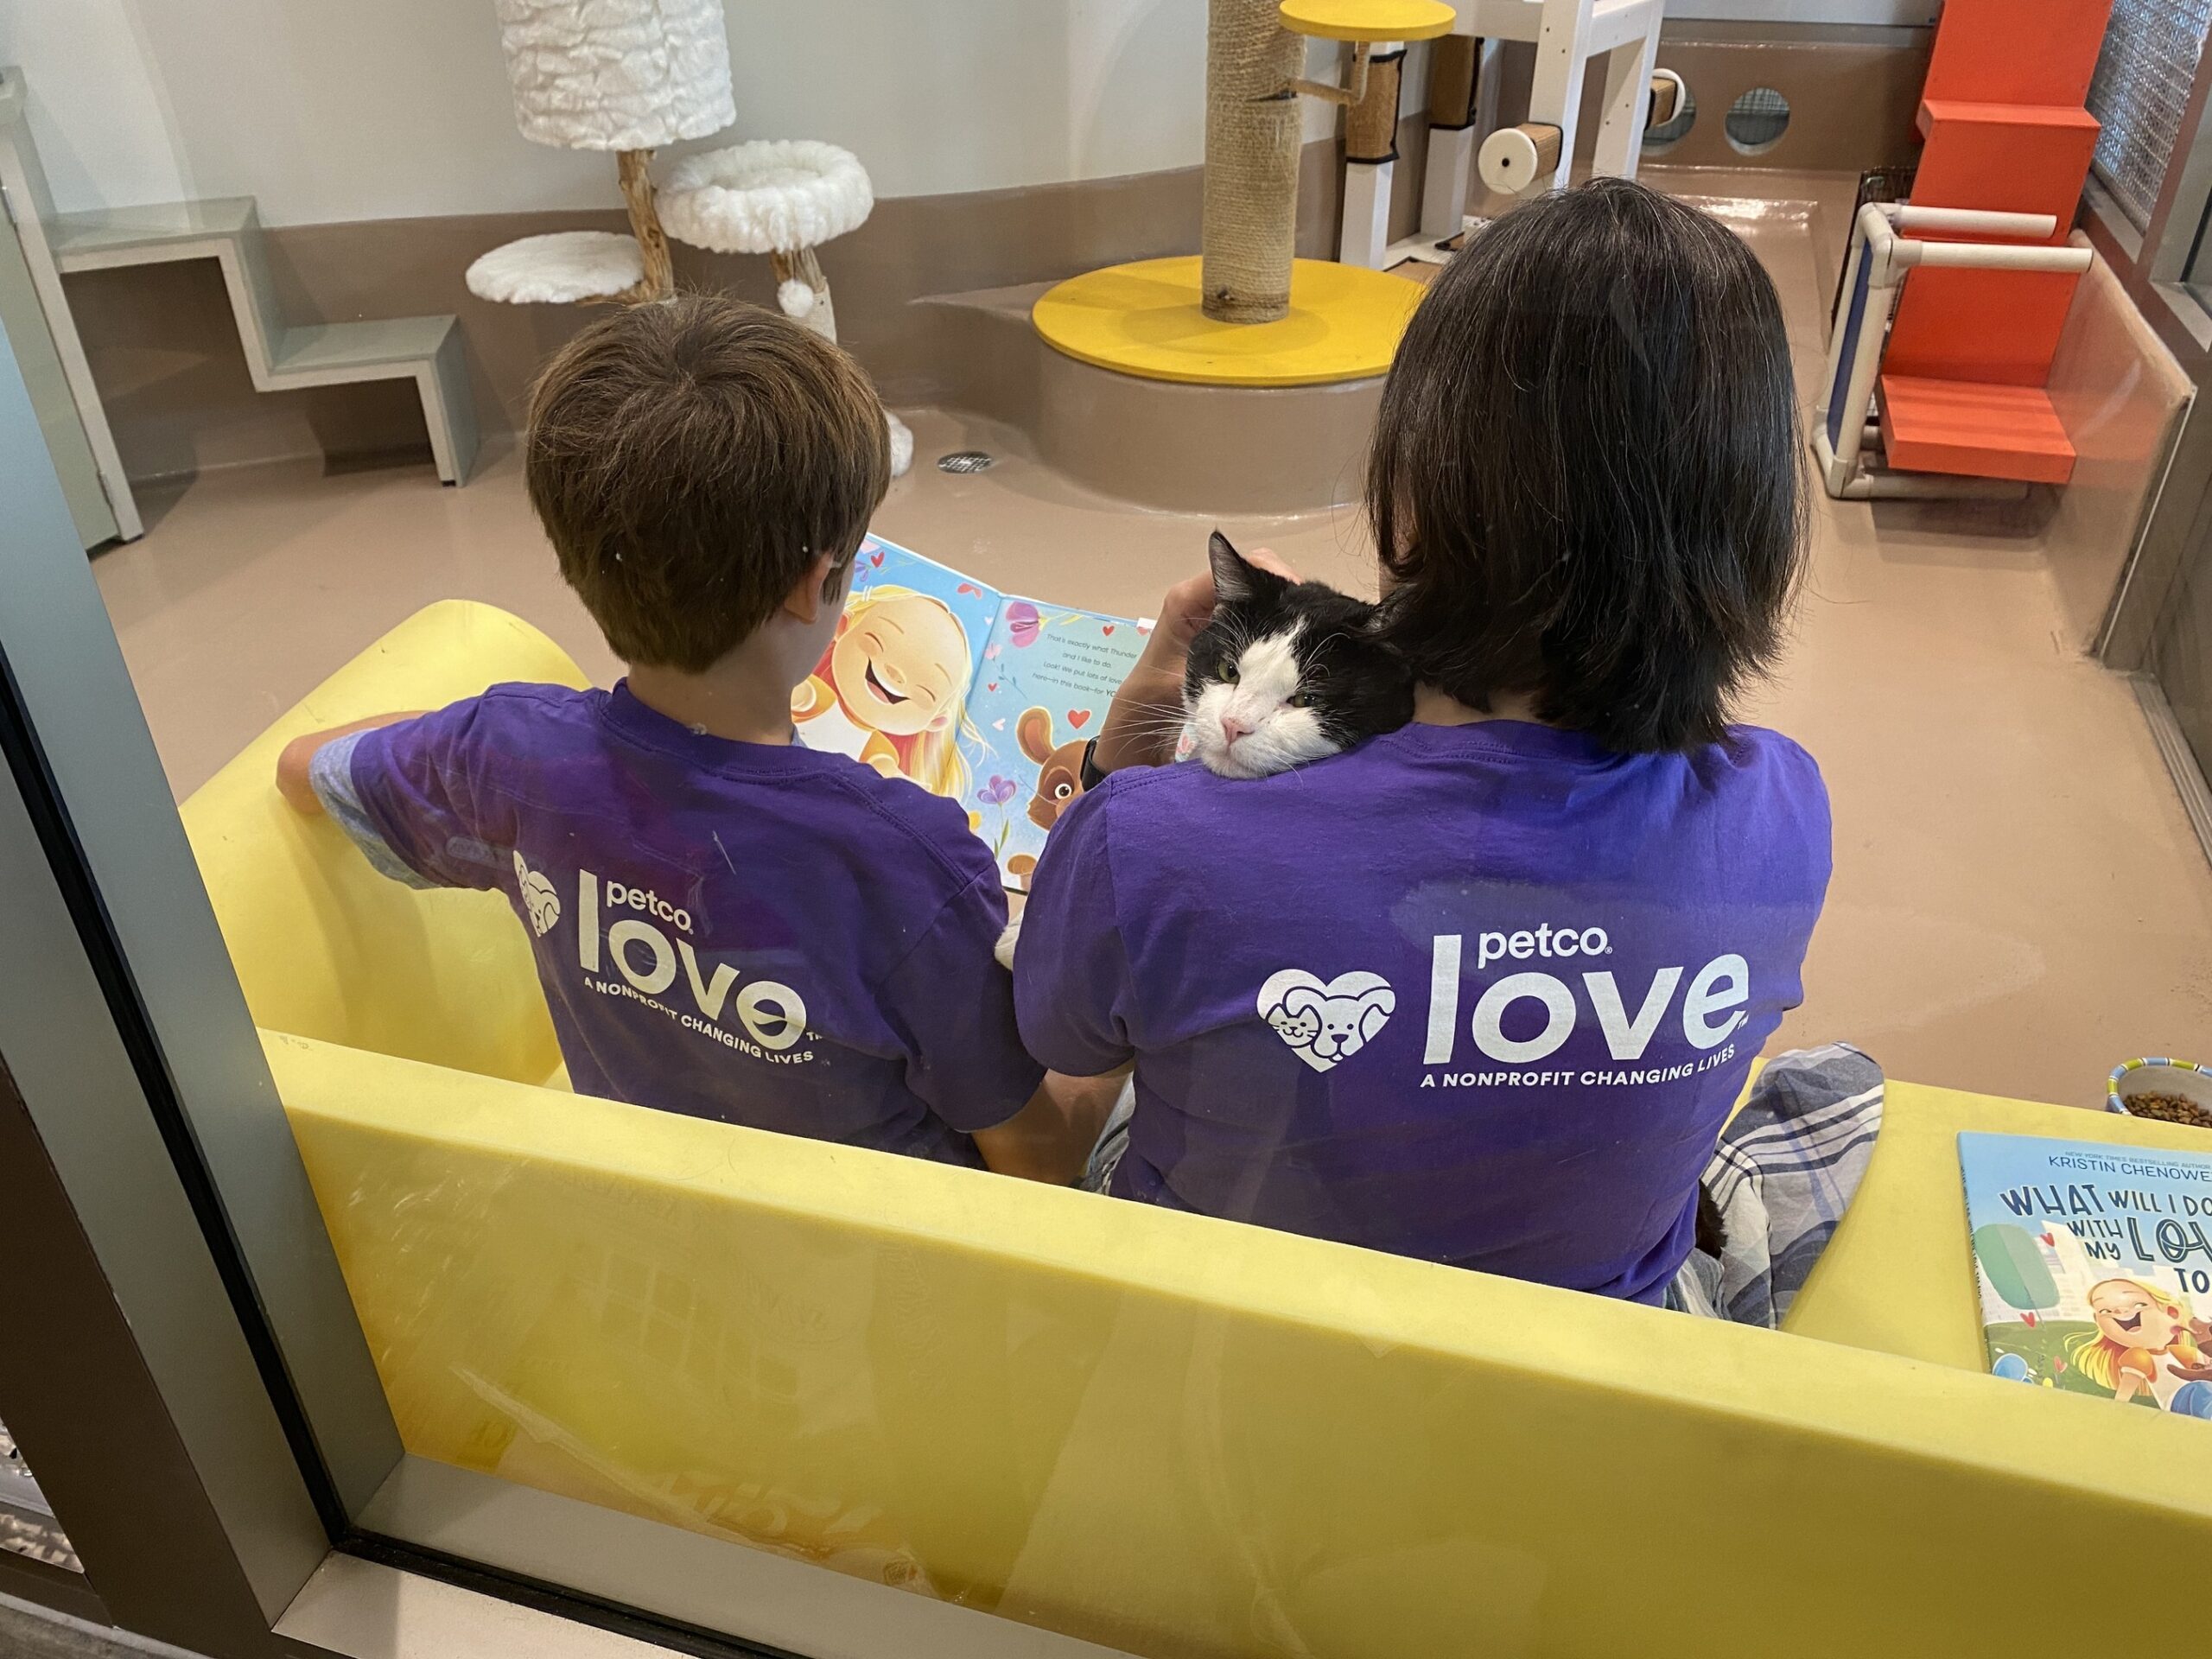 Petco Love and Actress Kristin Chenoweth Unite Children’s Voices to ‘Read and Share Their Love’ with Shelter Pets